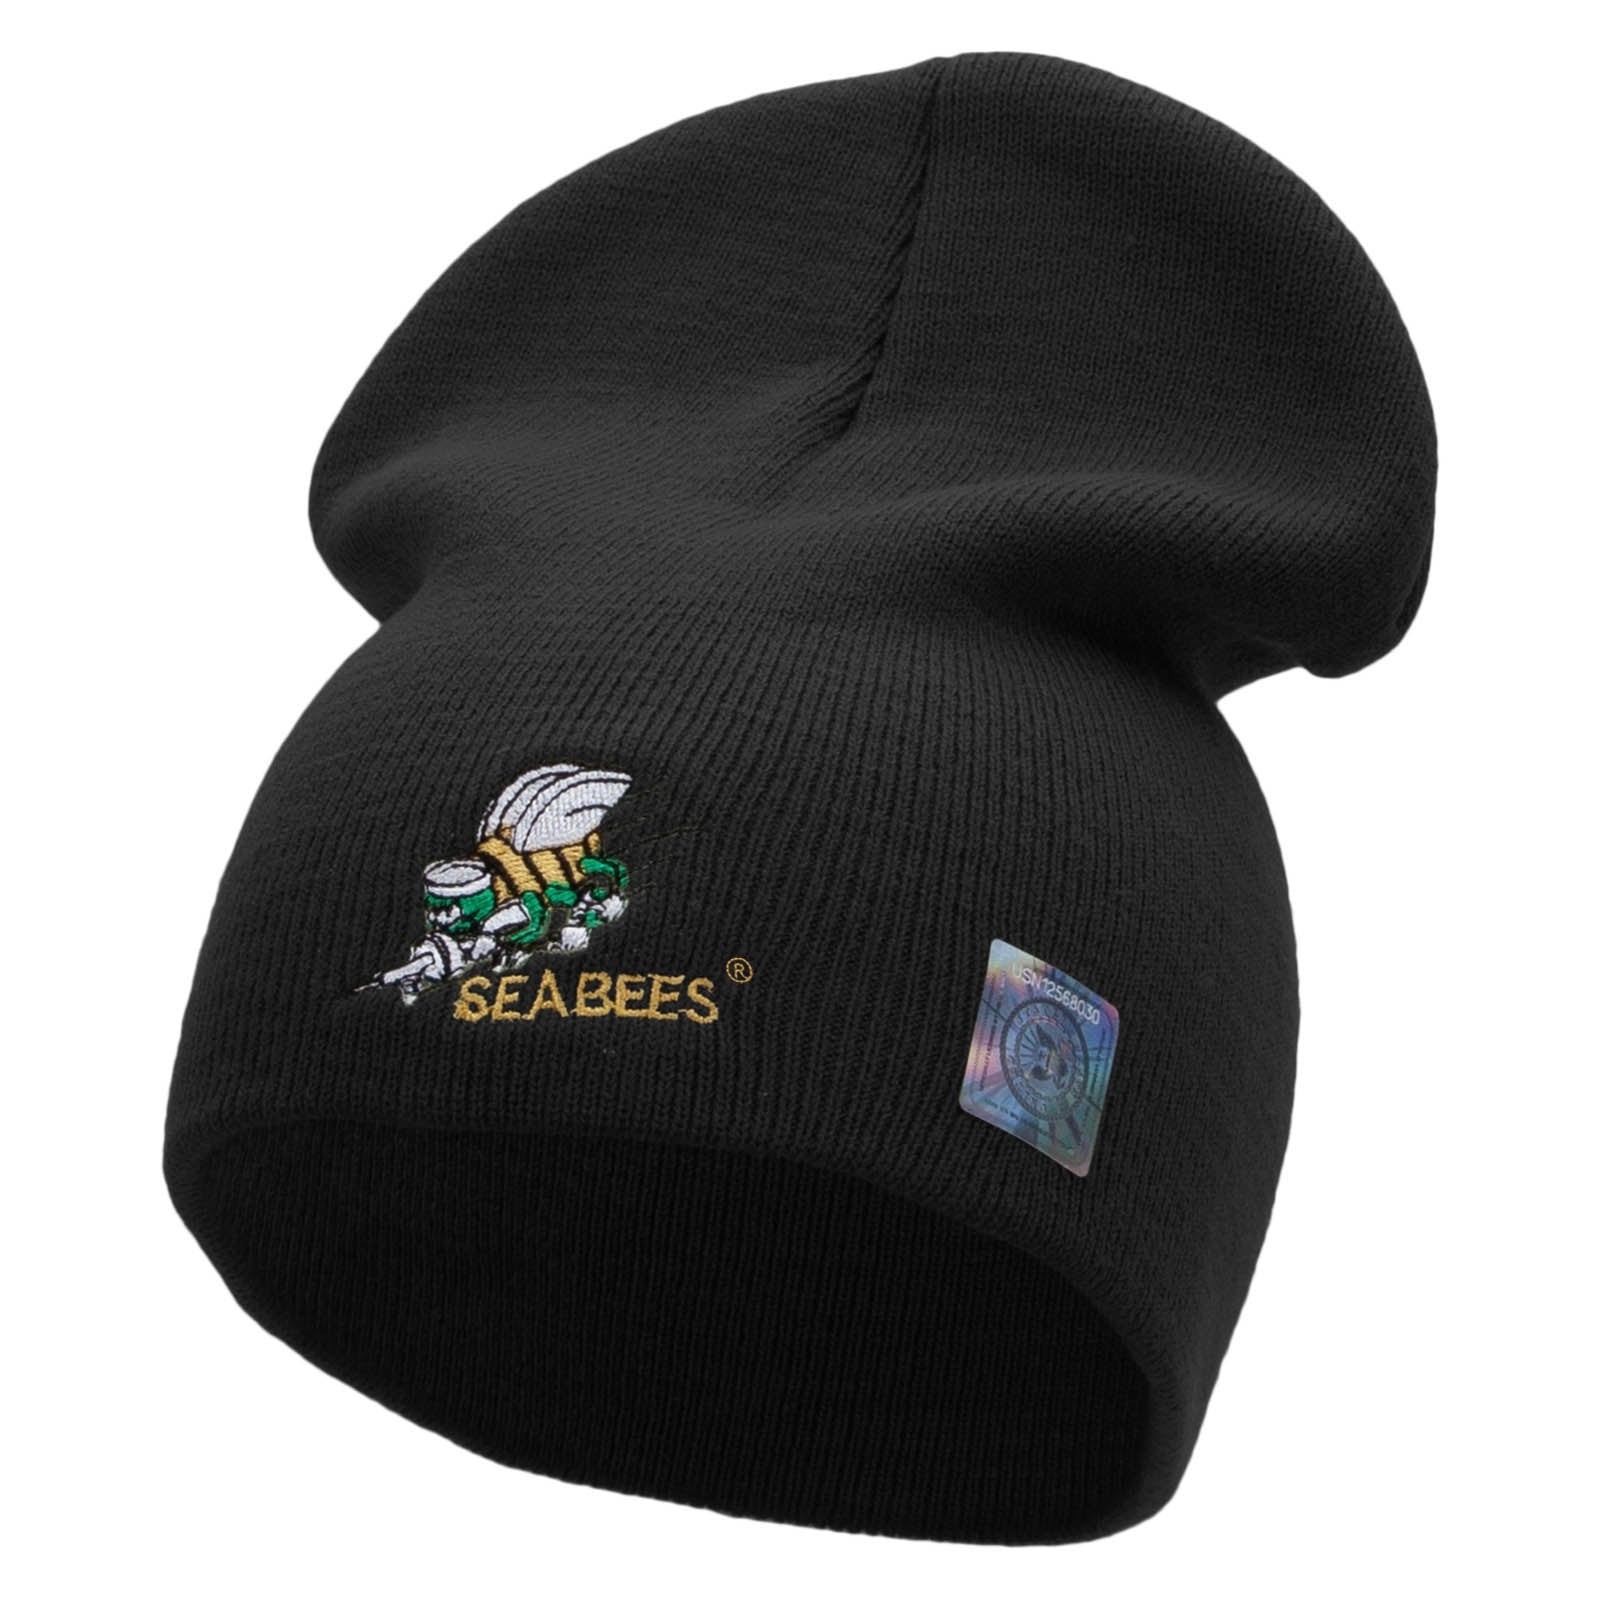 Licensed Navy Seabees Embroidered Short Beanie Made in USA - Black OSFM